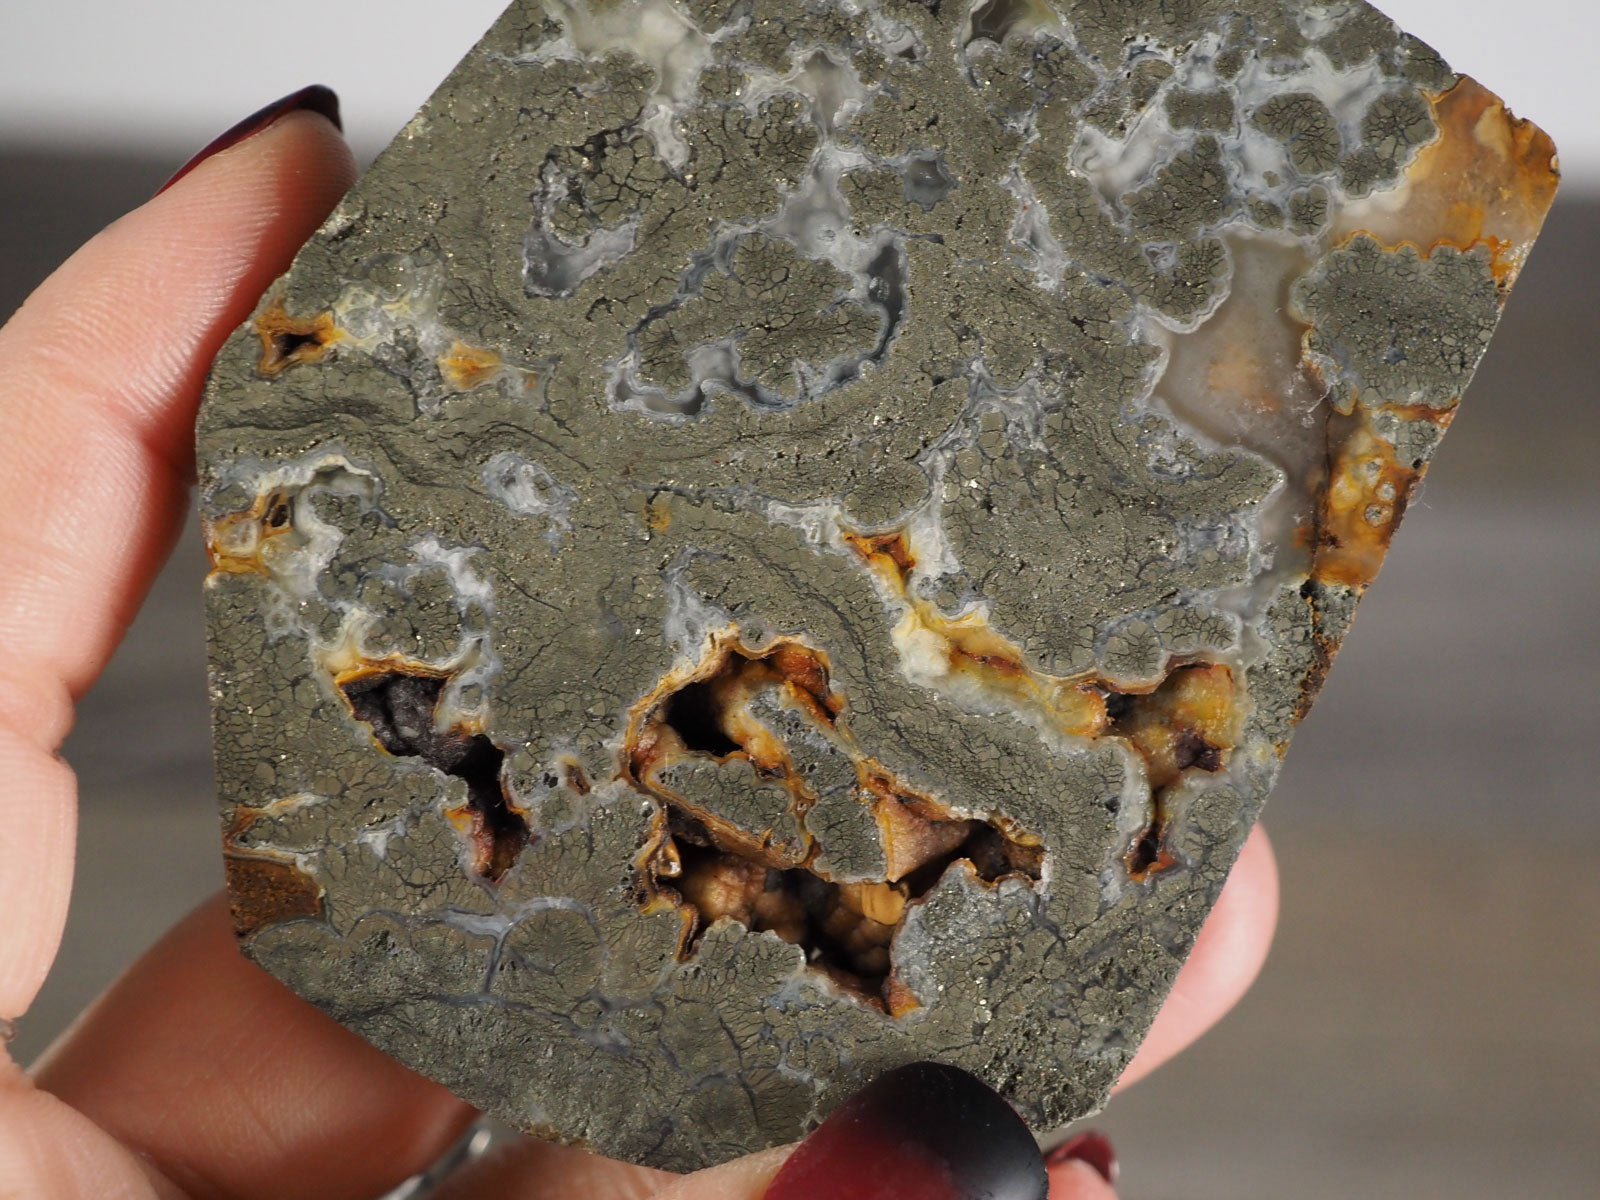 Pyrite Flower Agate Slab with Botryoidal Elements - Closeup in hand